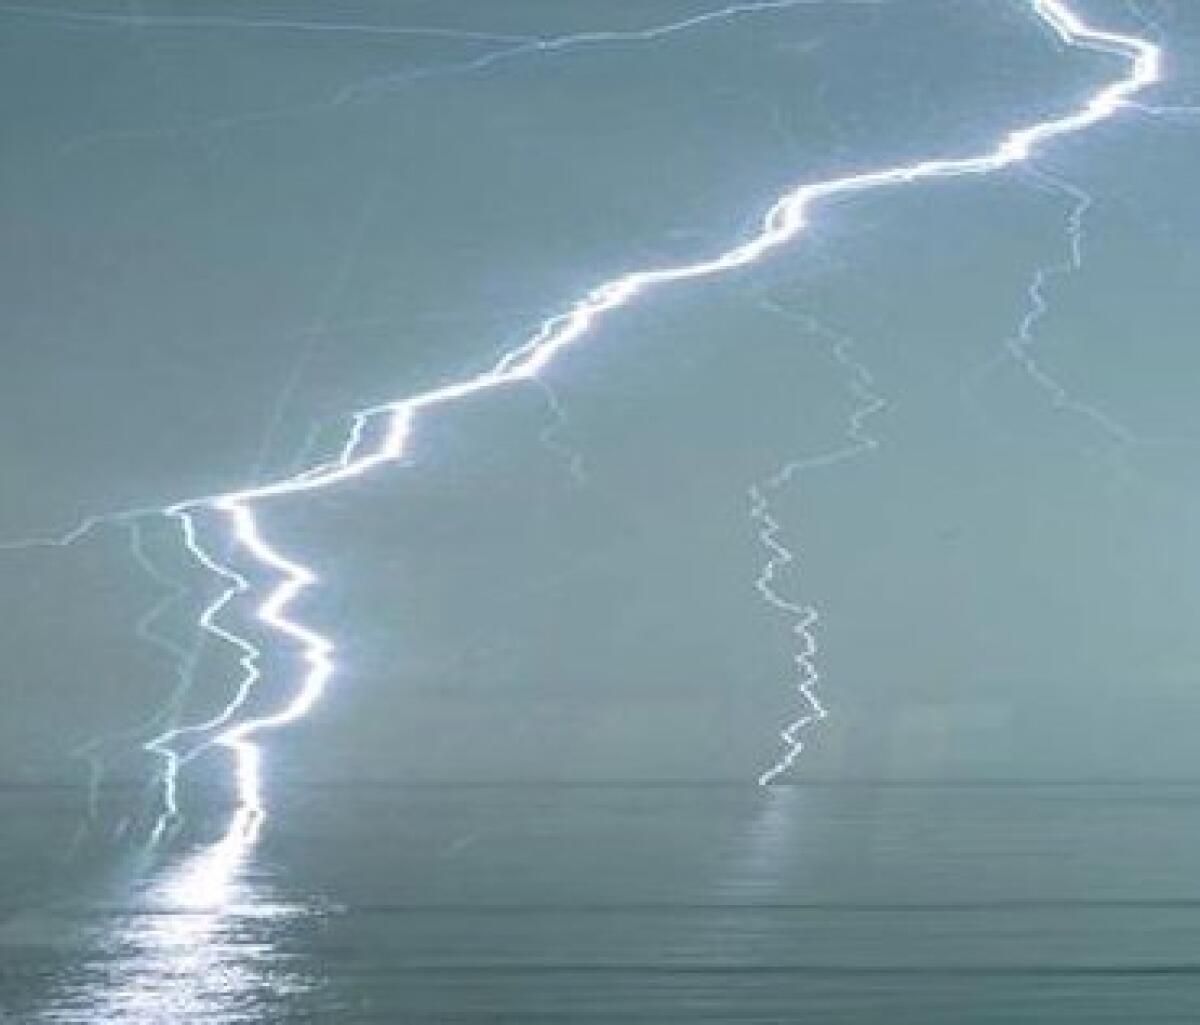 Lewis Surrey of Leucadia took this image of lightning hitting the ocean off Leucadia shortly after 7 a.m. on Wednesday. Surrey shot the photo through a window of his home on the bluffs above the beach. Lewis Surrey